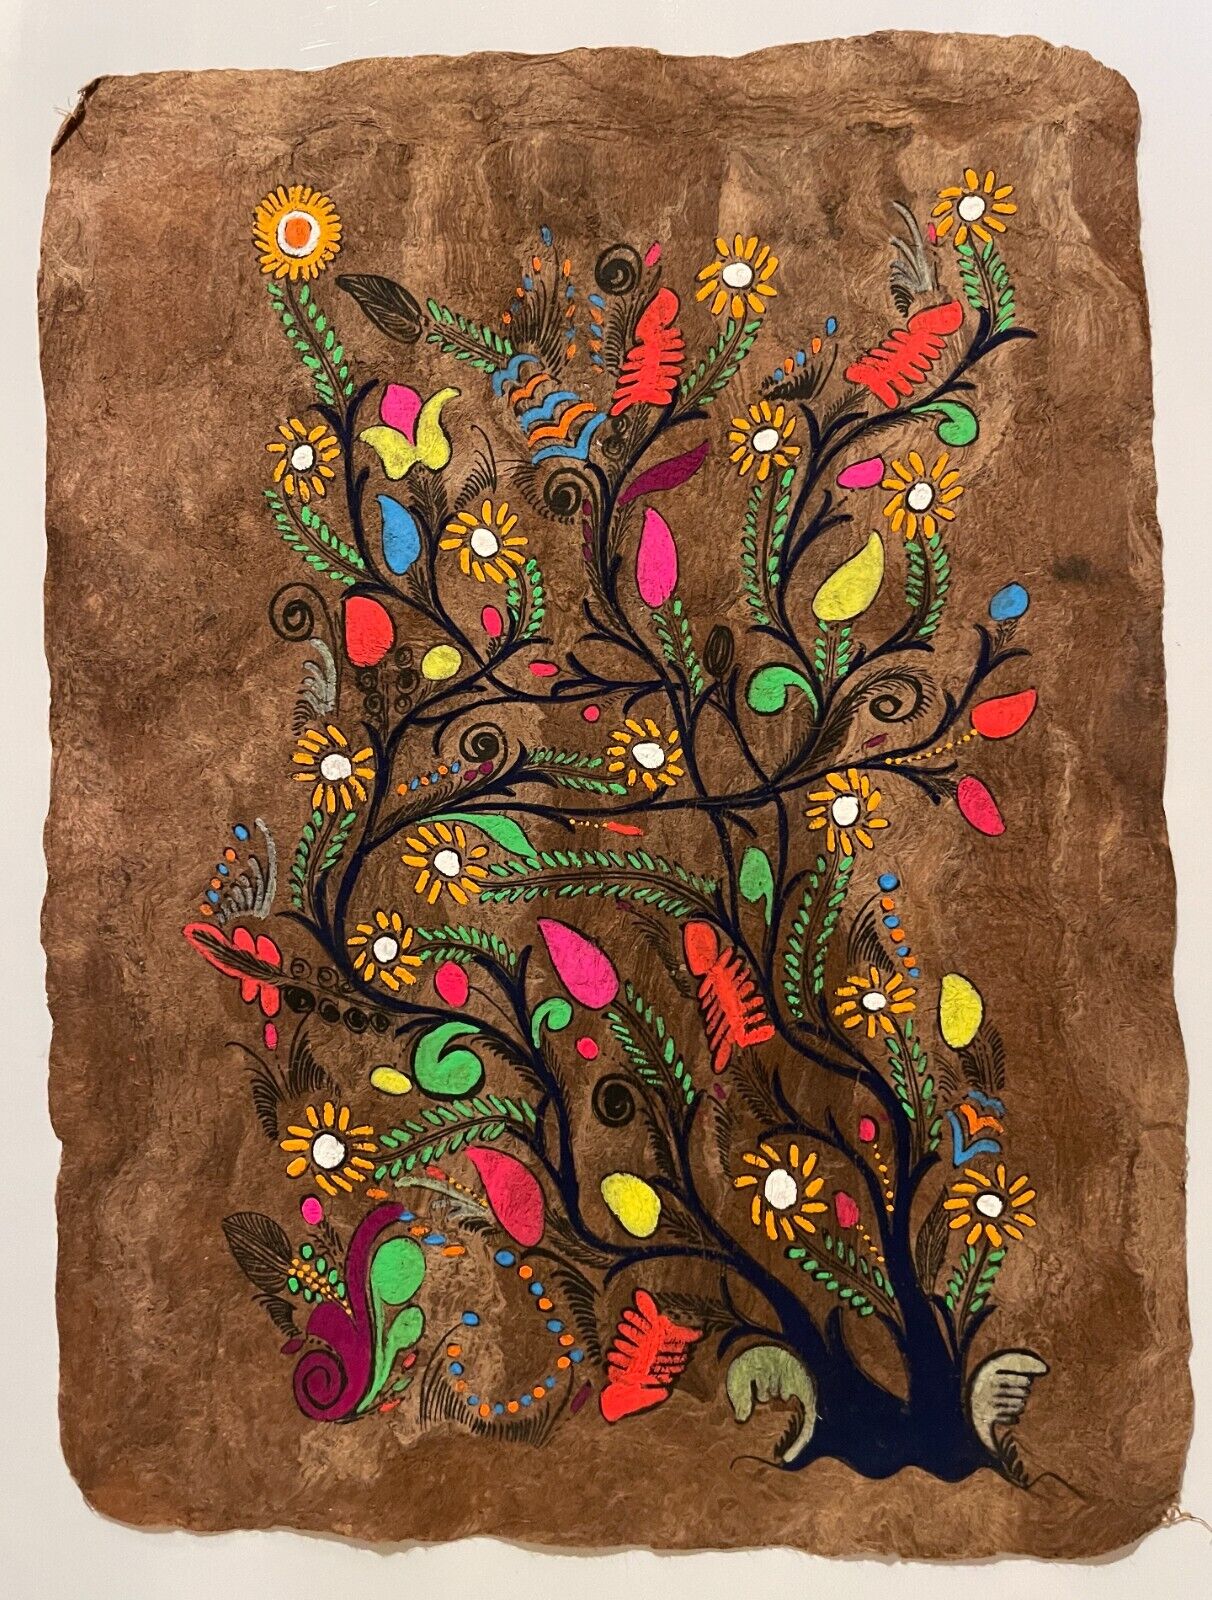 Vintage Mid-60’s Colorful Mexican Folk Art Painting on Amate Tree Bark Parchment